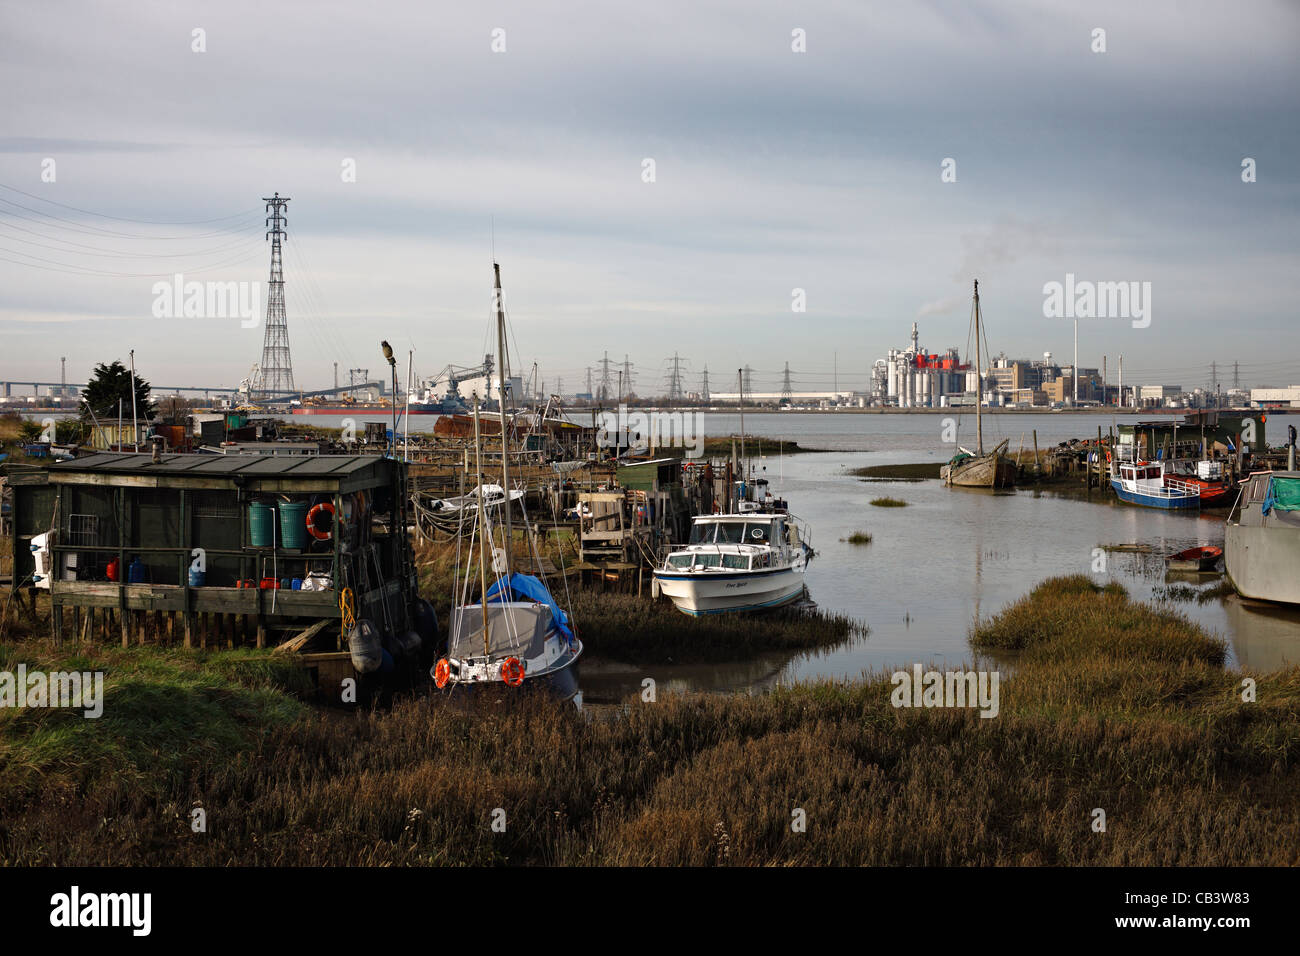 Community of people living in a creek, Swanscombe Marshes. Stock Photo